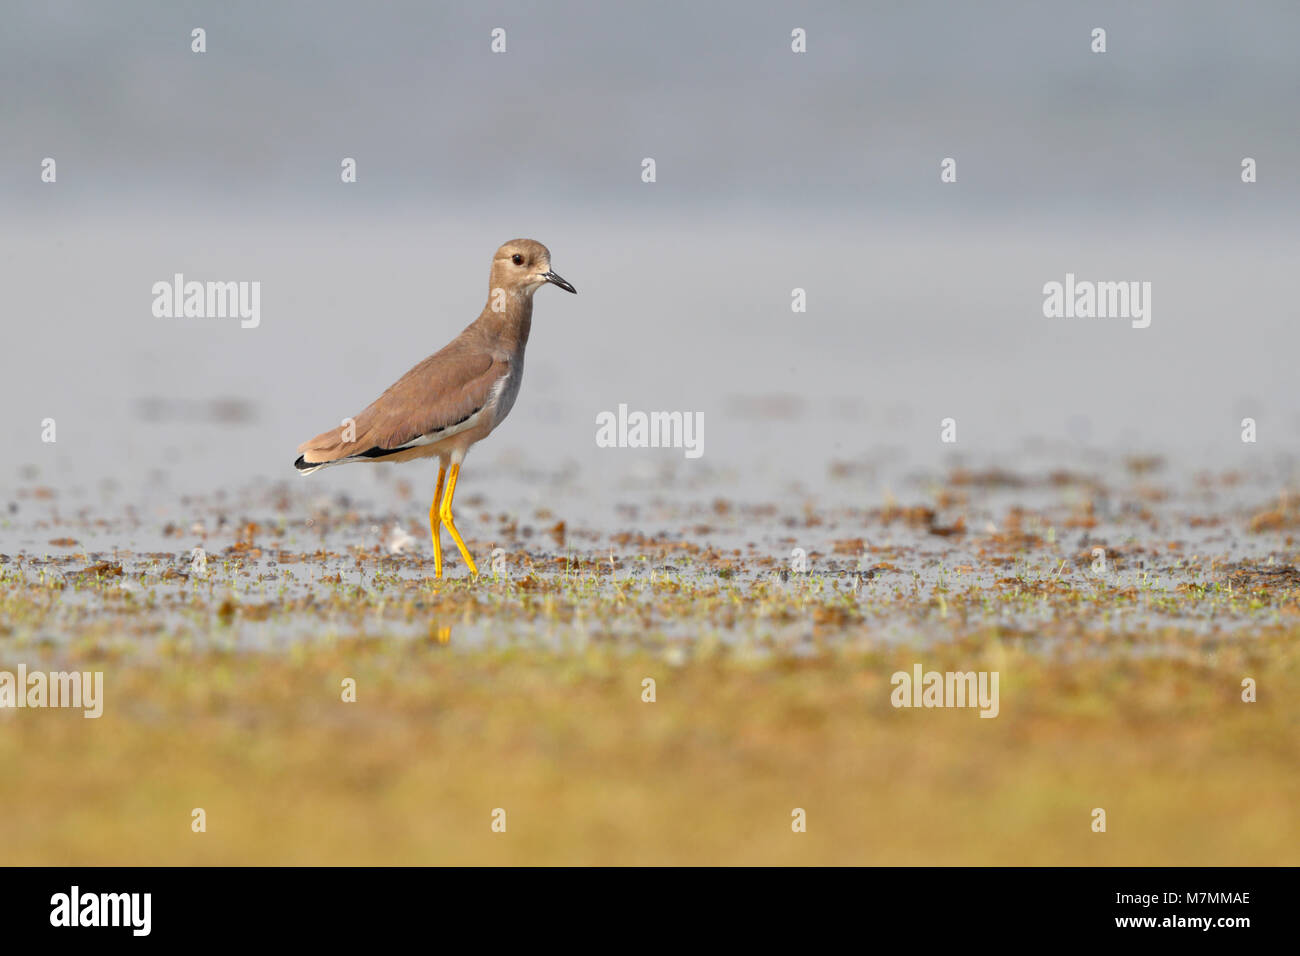 Adult White-tailed Lapwing or Plover (Vanellus leucurus) feeding at the edge of a pool at the Little Rann of Kutch, Gujarat, India Stock Photo